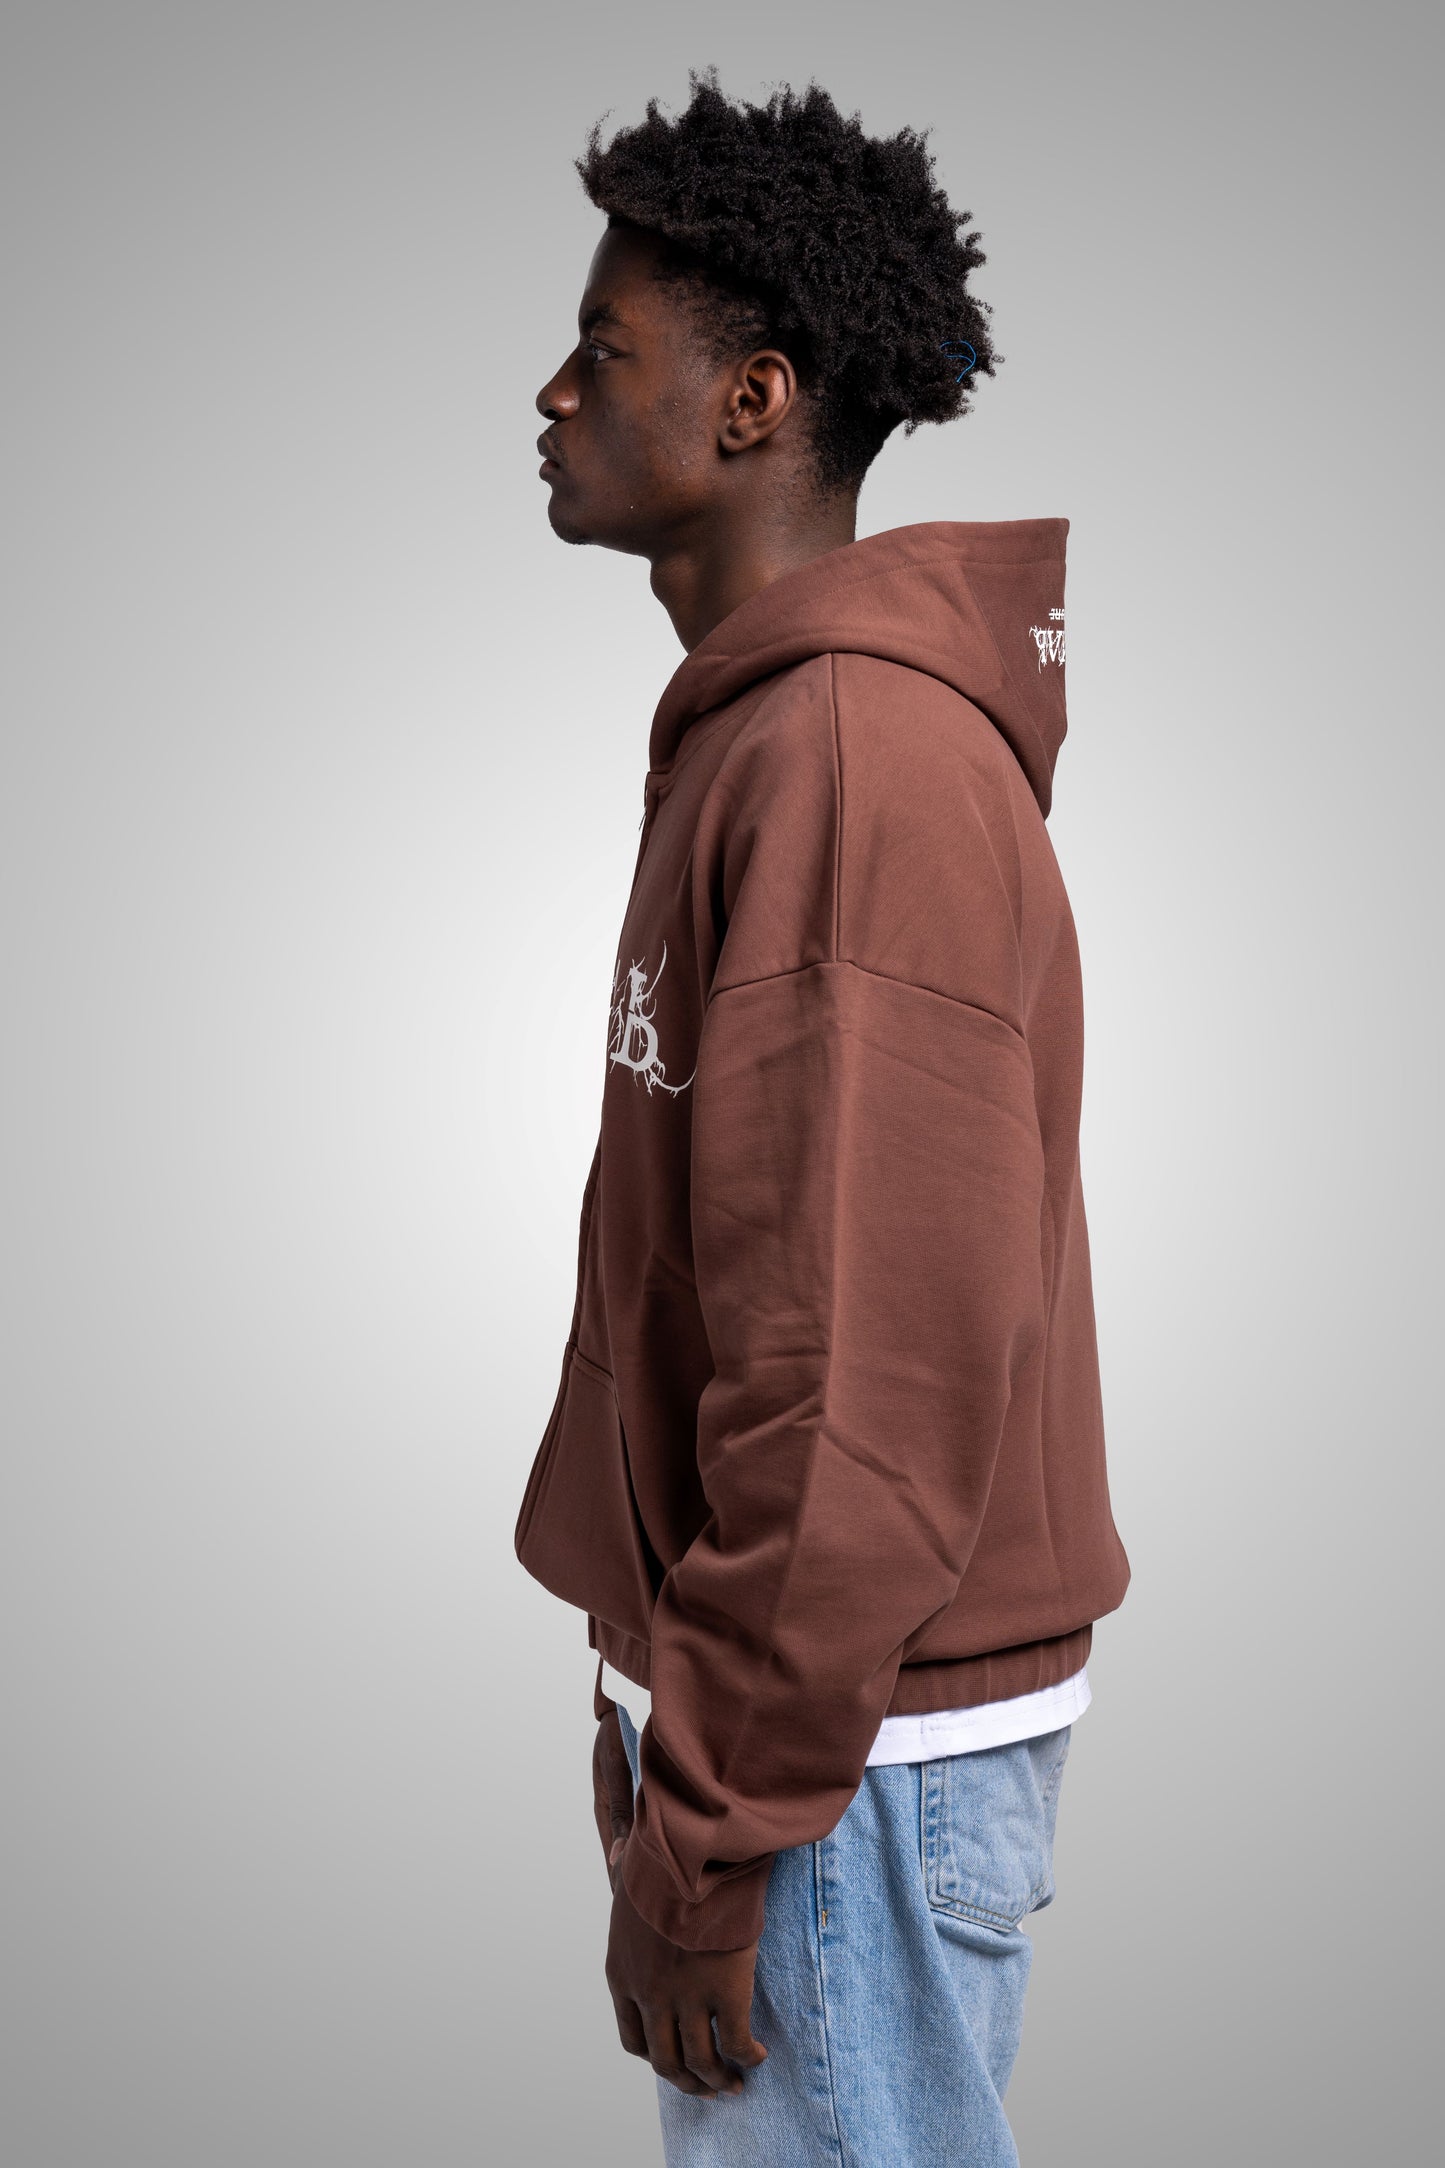 STIL COUTURE Oversize Zip-Hoodie | Metal Font - Chocolate